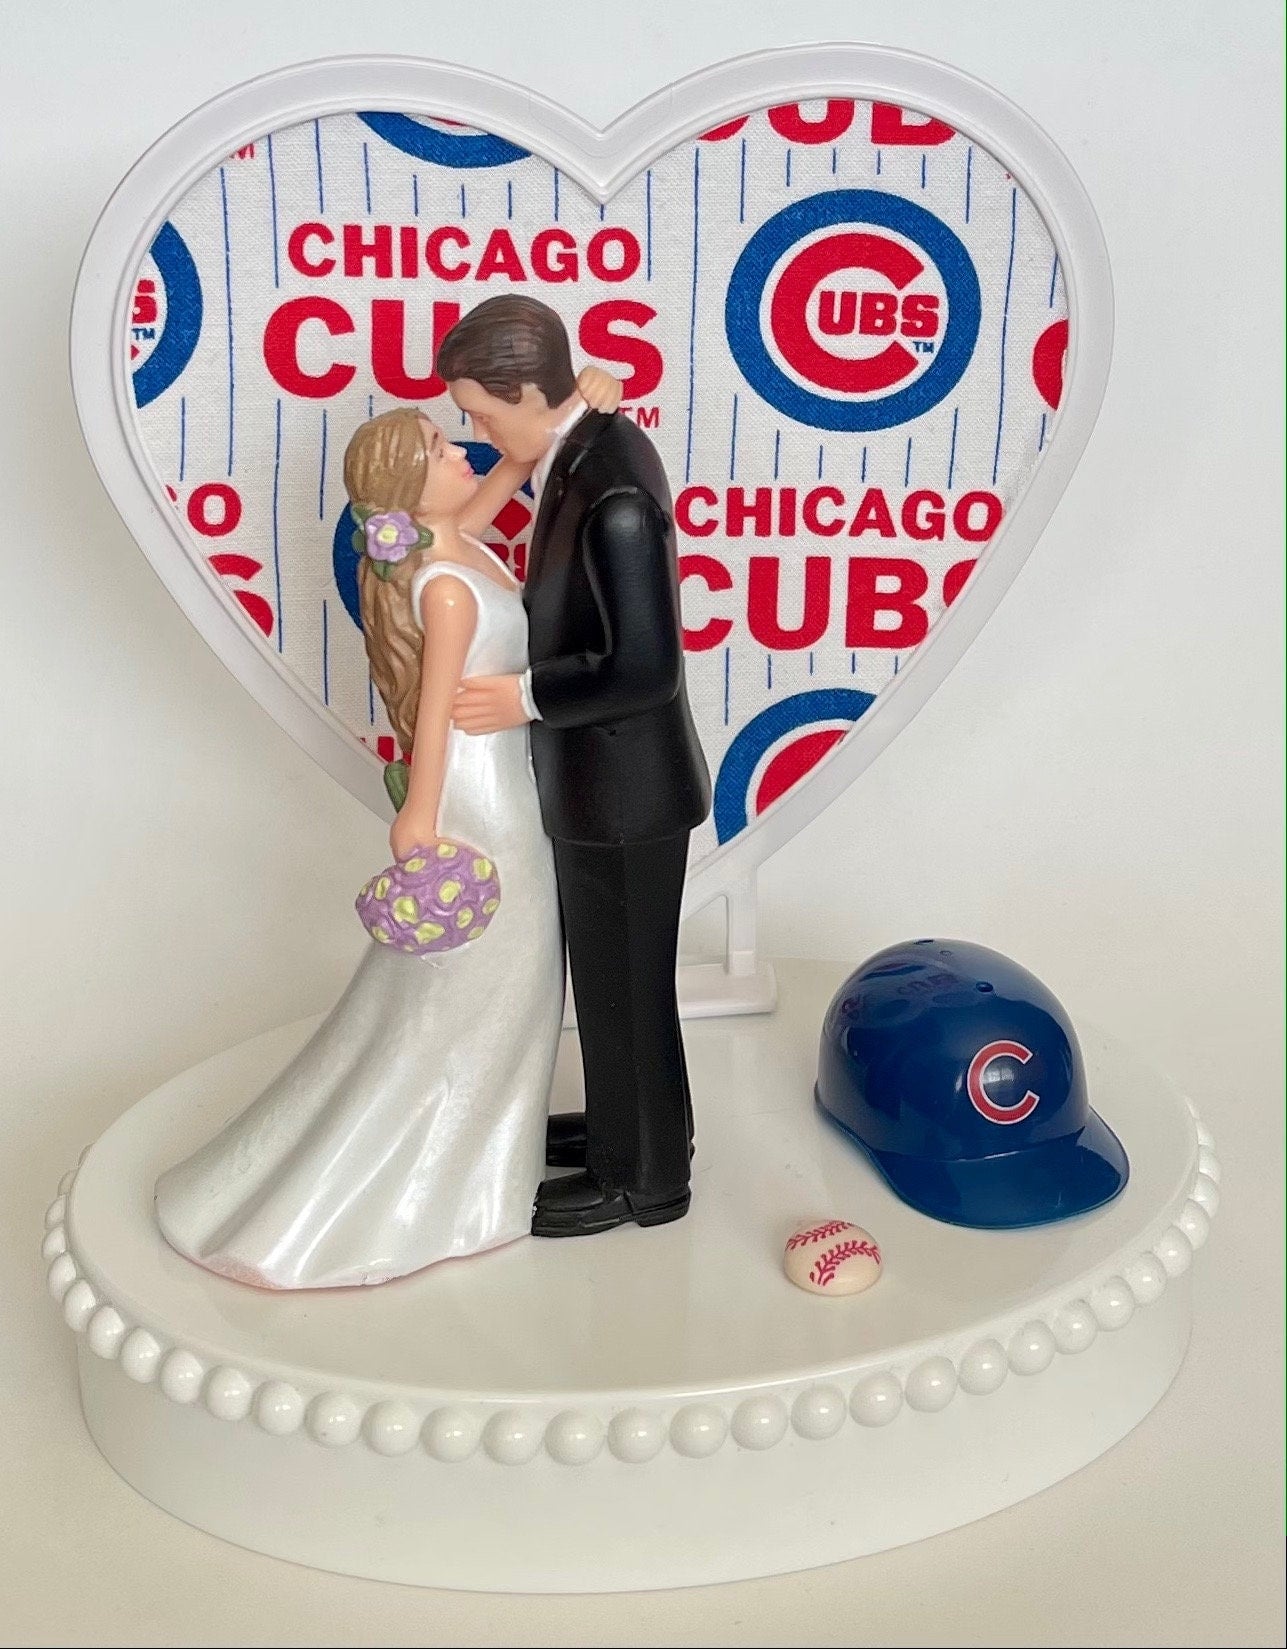 Wedding Cake Topper Chicago Cubs Baseball Themed Beautiful Long-Haired Bride and Groom Fun Groom's Cake Top Shower Gift Idea Reception